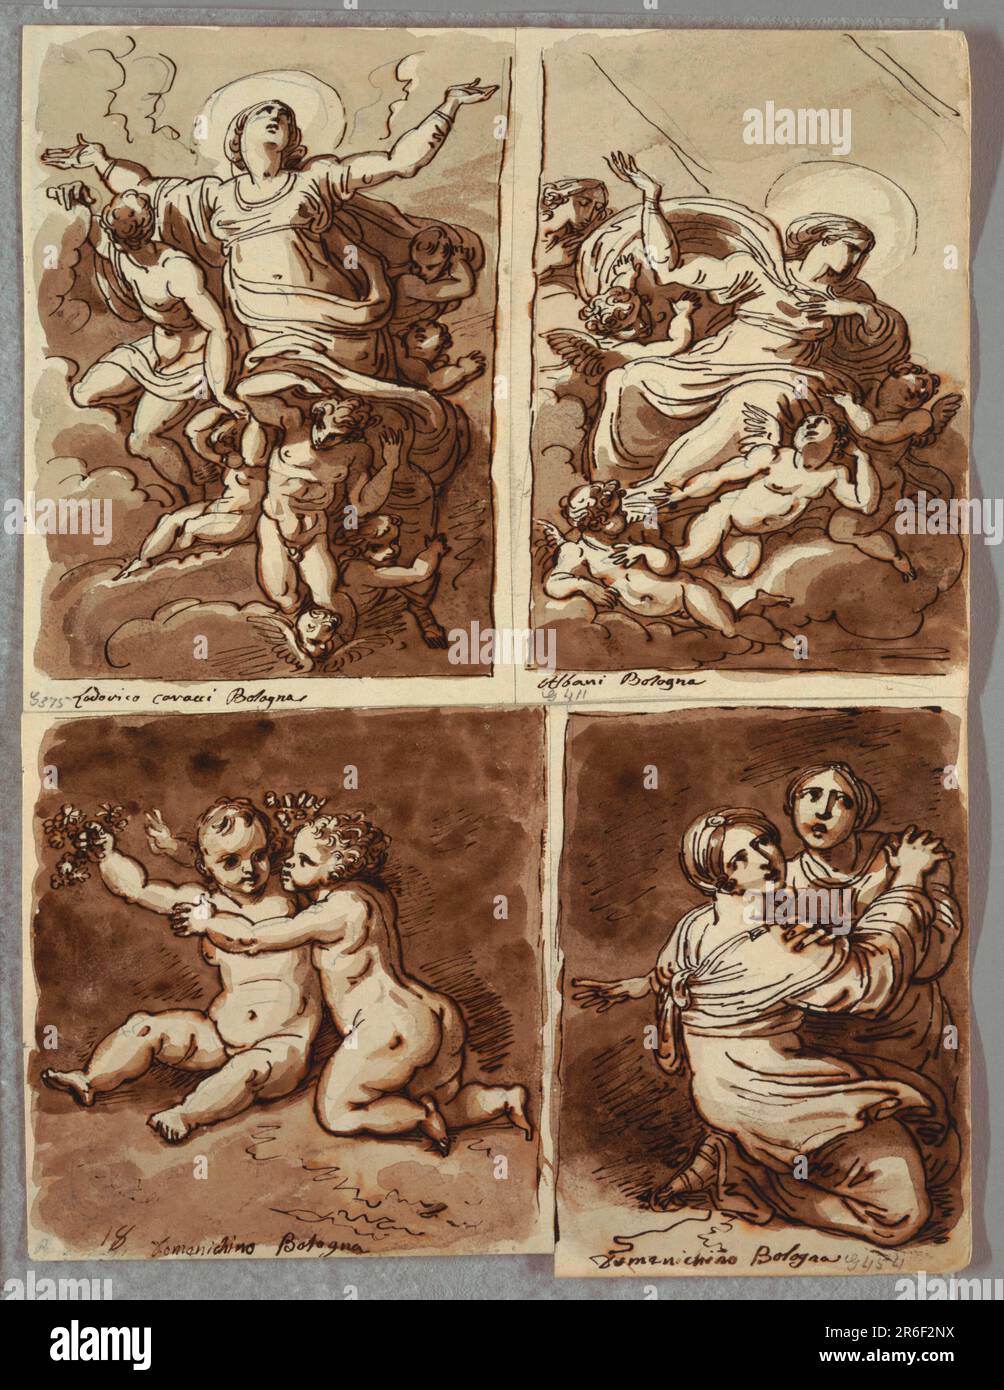 Upper left, the Virgin, with arms extended, born heavenwards through clouds by eight angels and cherubim. Upper right, Virgin born heavenwards, supported by four winged putti, with another angel at upper left. Lower left, two putti, one seated, and other kneeling, holding sprays of flowers. Lower right, two kneeling women, embracing. Date: 1821-22. Pen and ink, brush and brown wash, over black chalk on white wove paper. Museum: Cooper Hewitt, Smithsonian Design Museum. Stock Photo